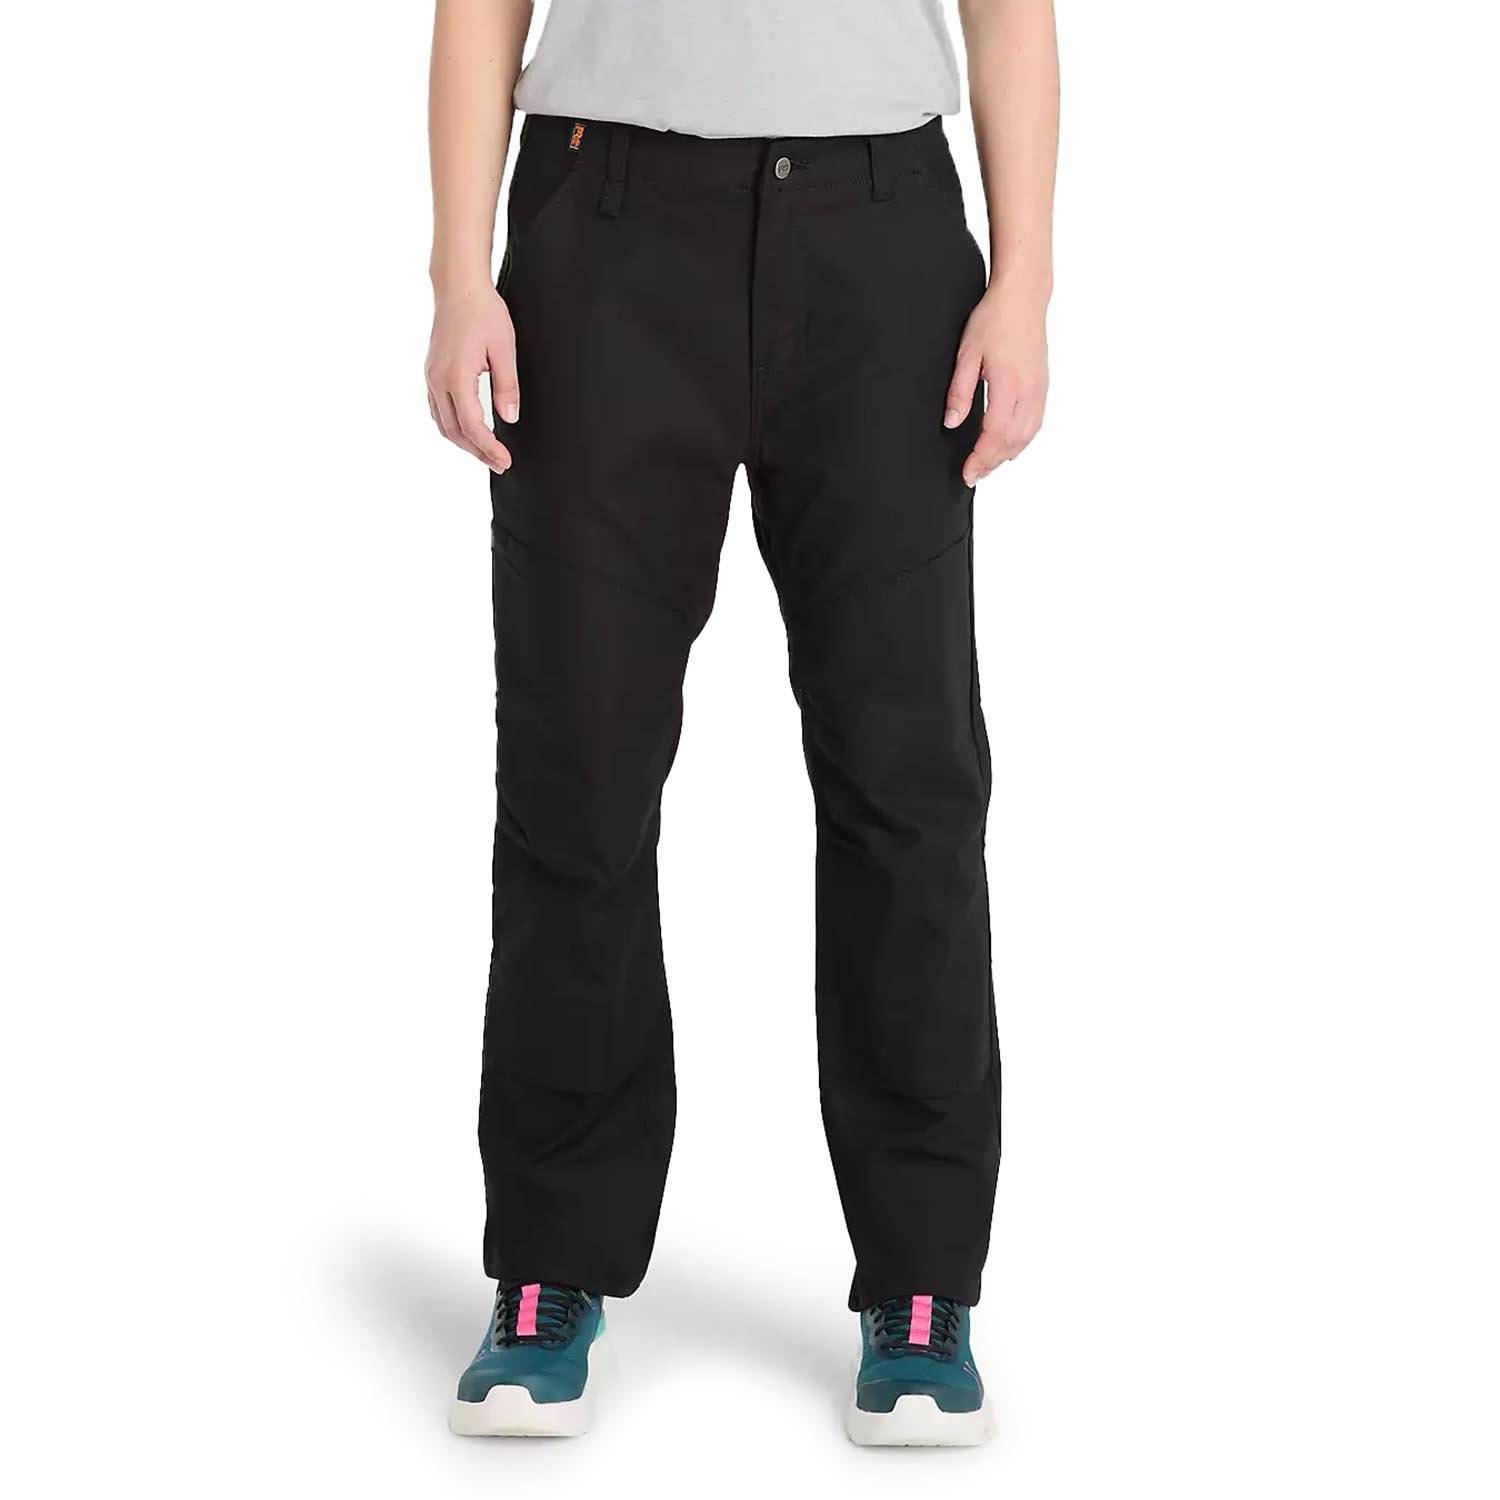 TIMBERLAND PRO WOMEN'S GRITFLEX DOUBLE FRONT UTILITY PANTS